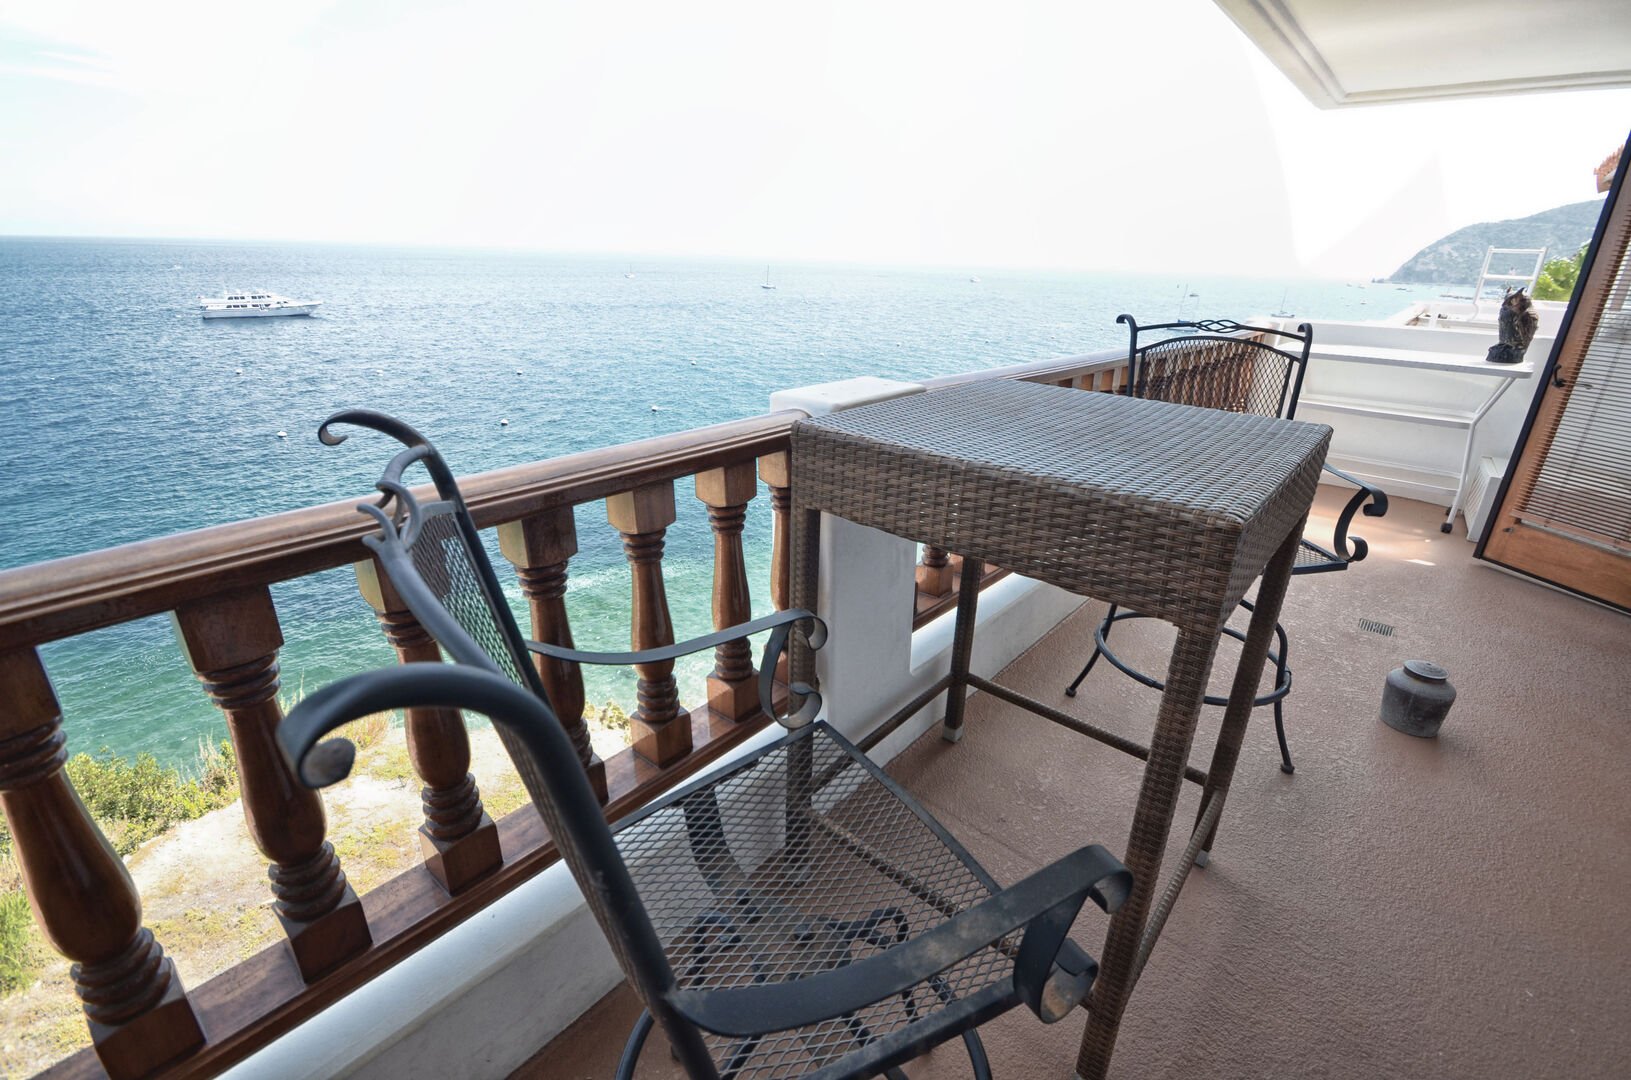 Relax on your private balcony with spectacular views